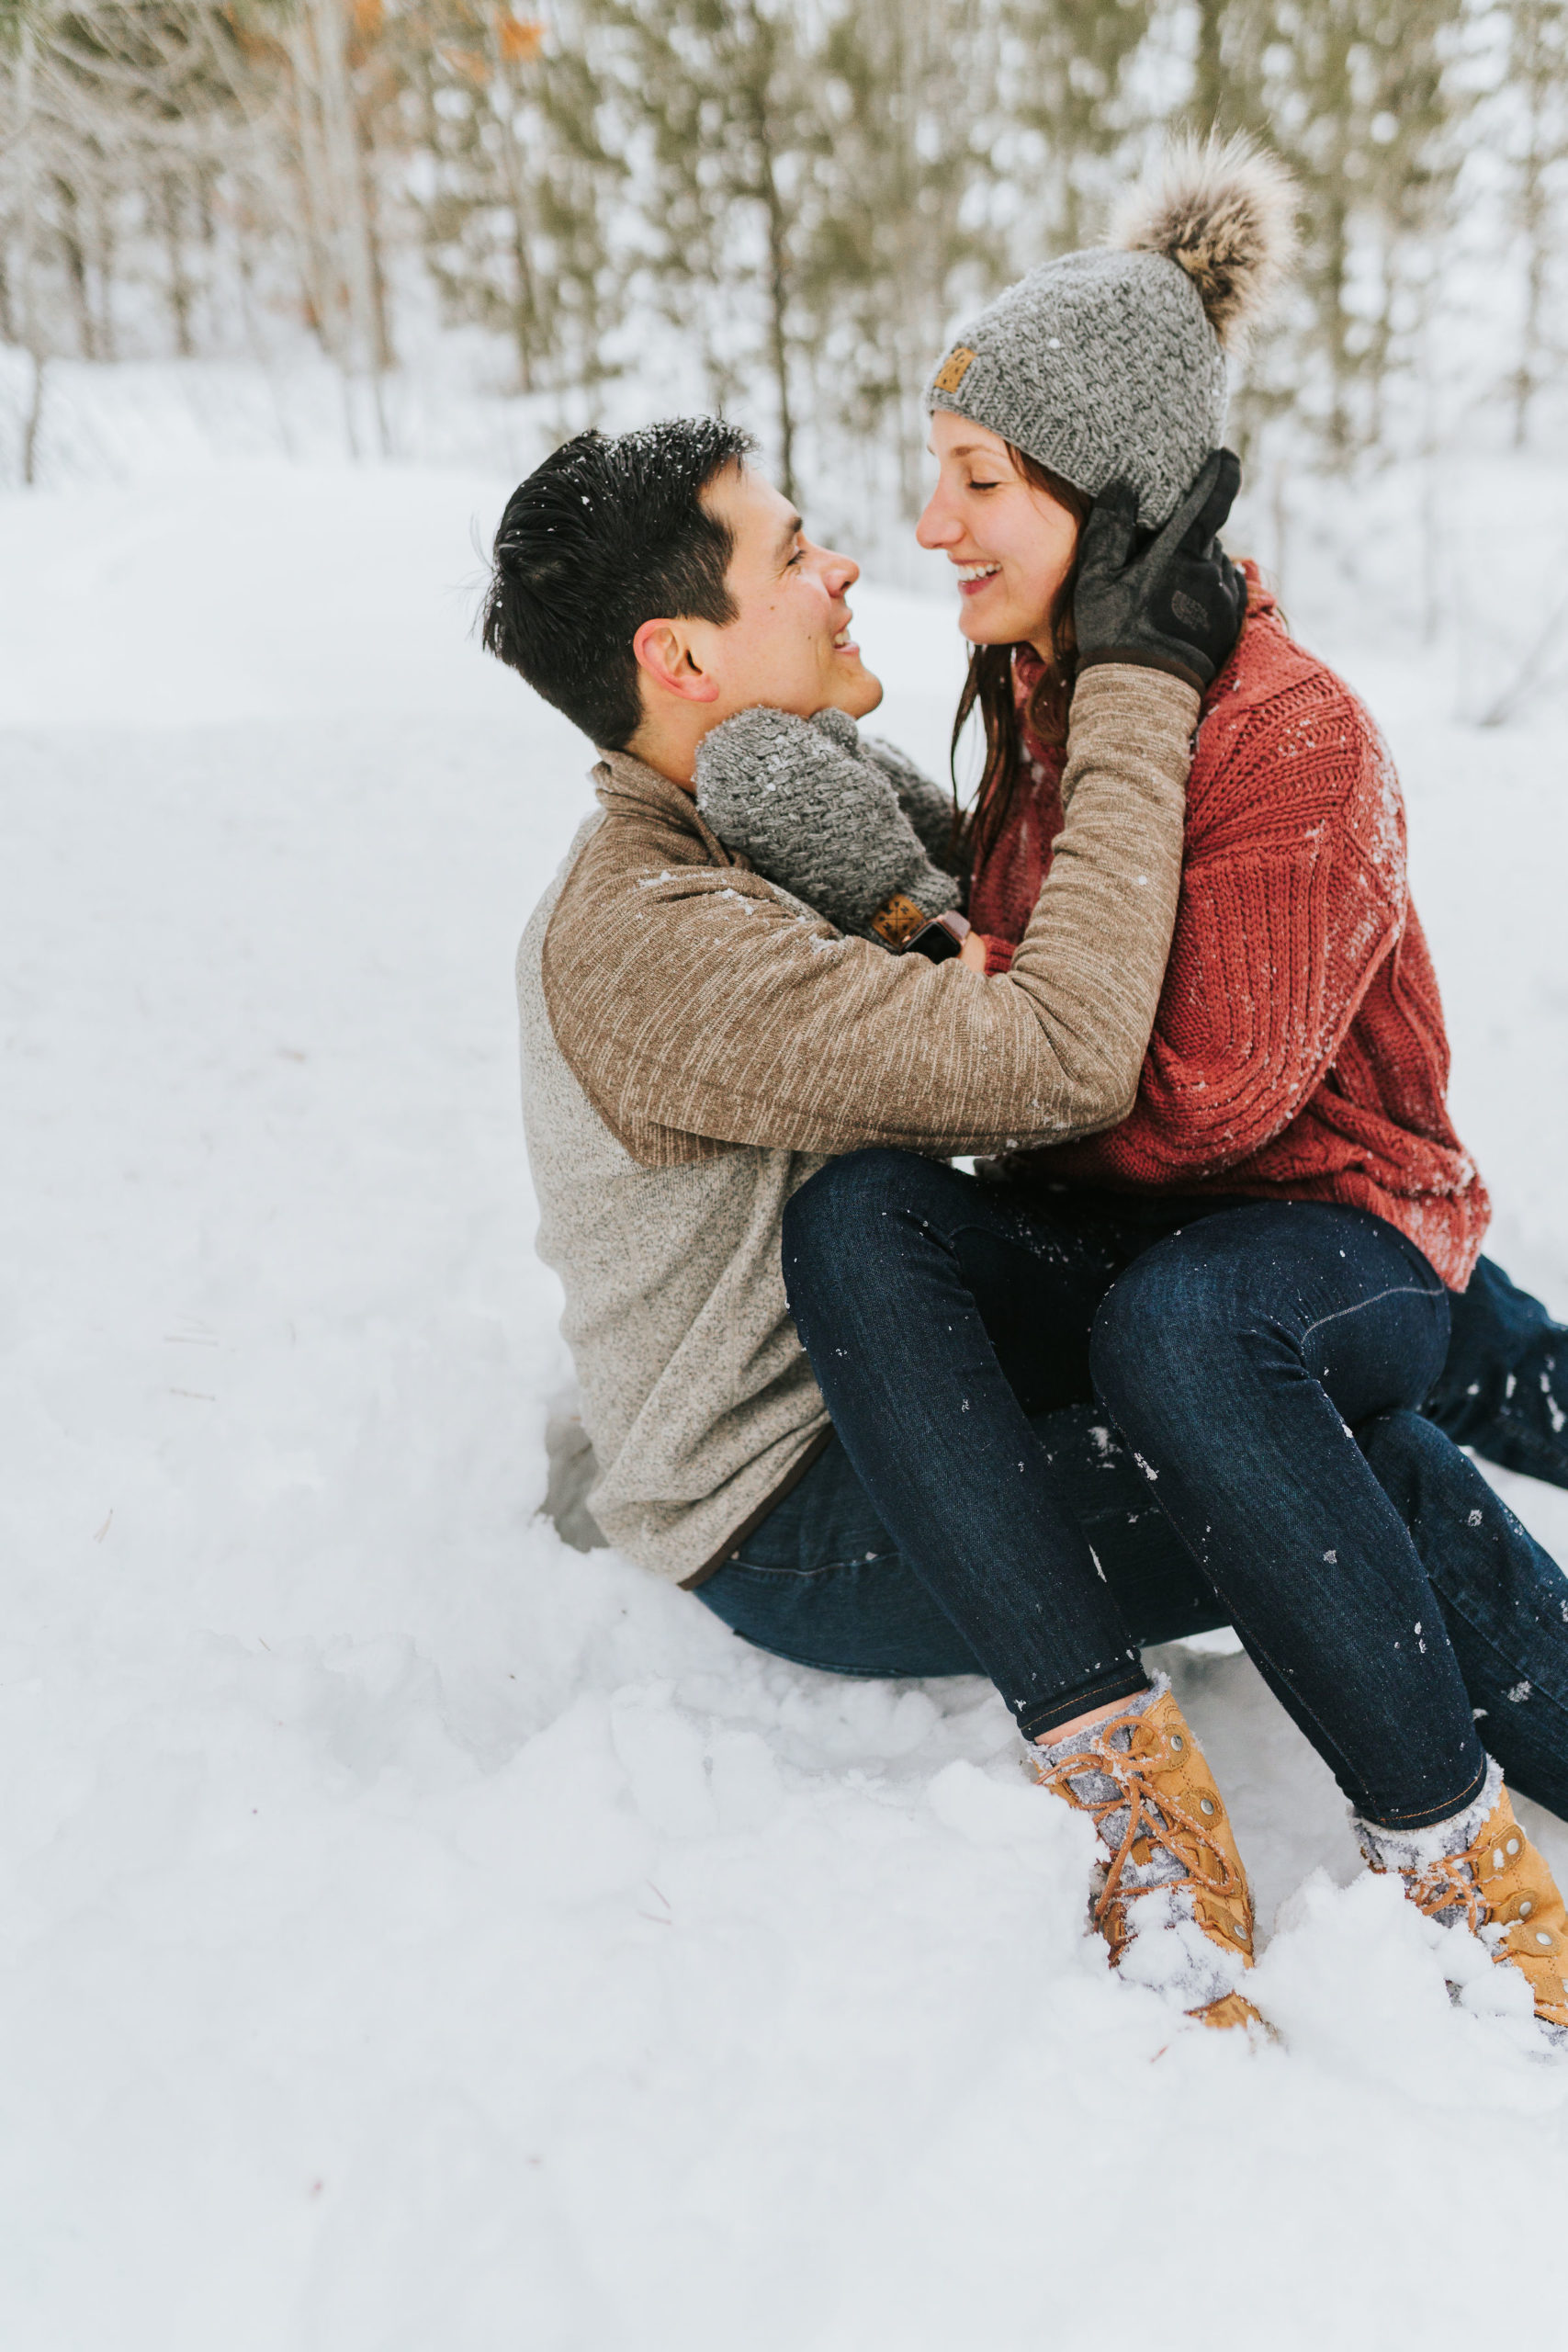 casual winter engagement photo outfits inspo with man and woman playing in the snow and rolling around for a fun and adventurous winter engagement session with the best Smoky Mountain wedding photographers